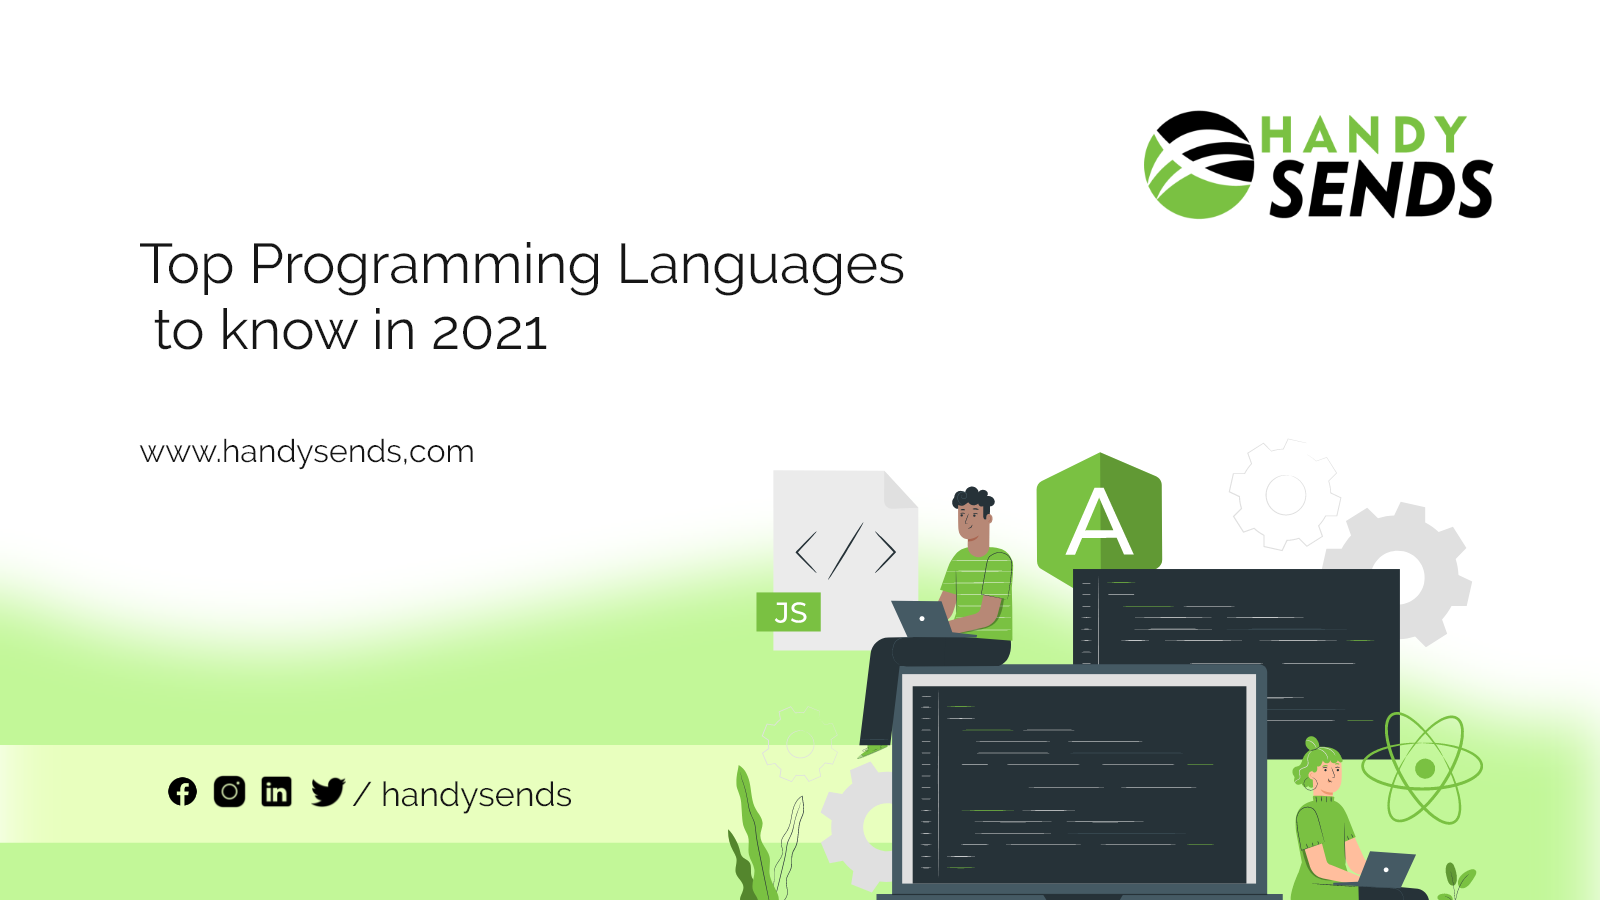 Top Programming Languages to know in 2021